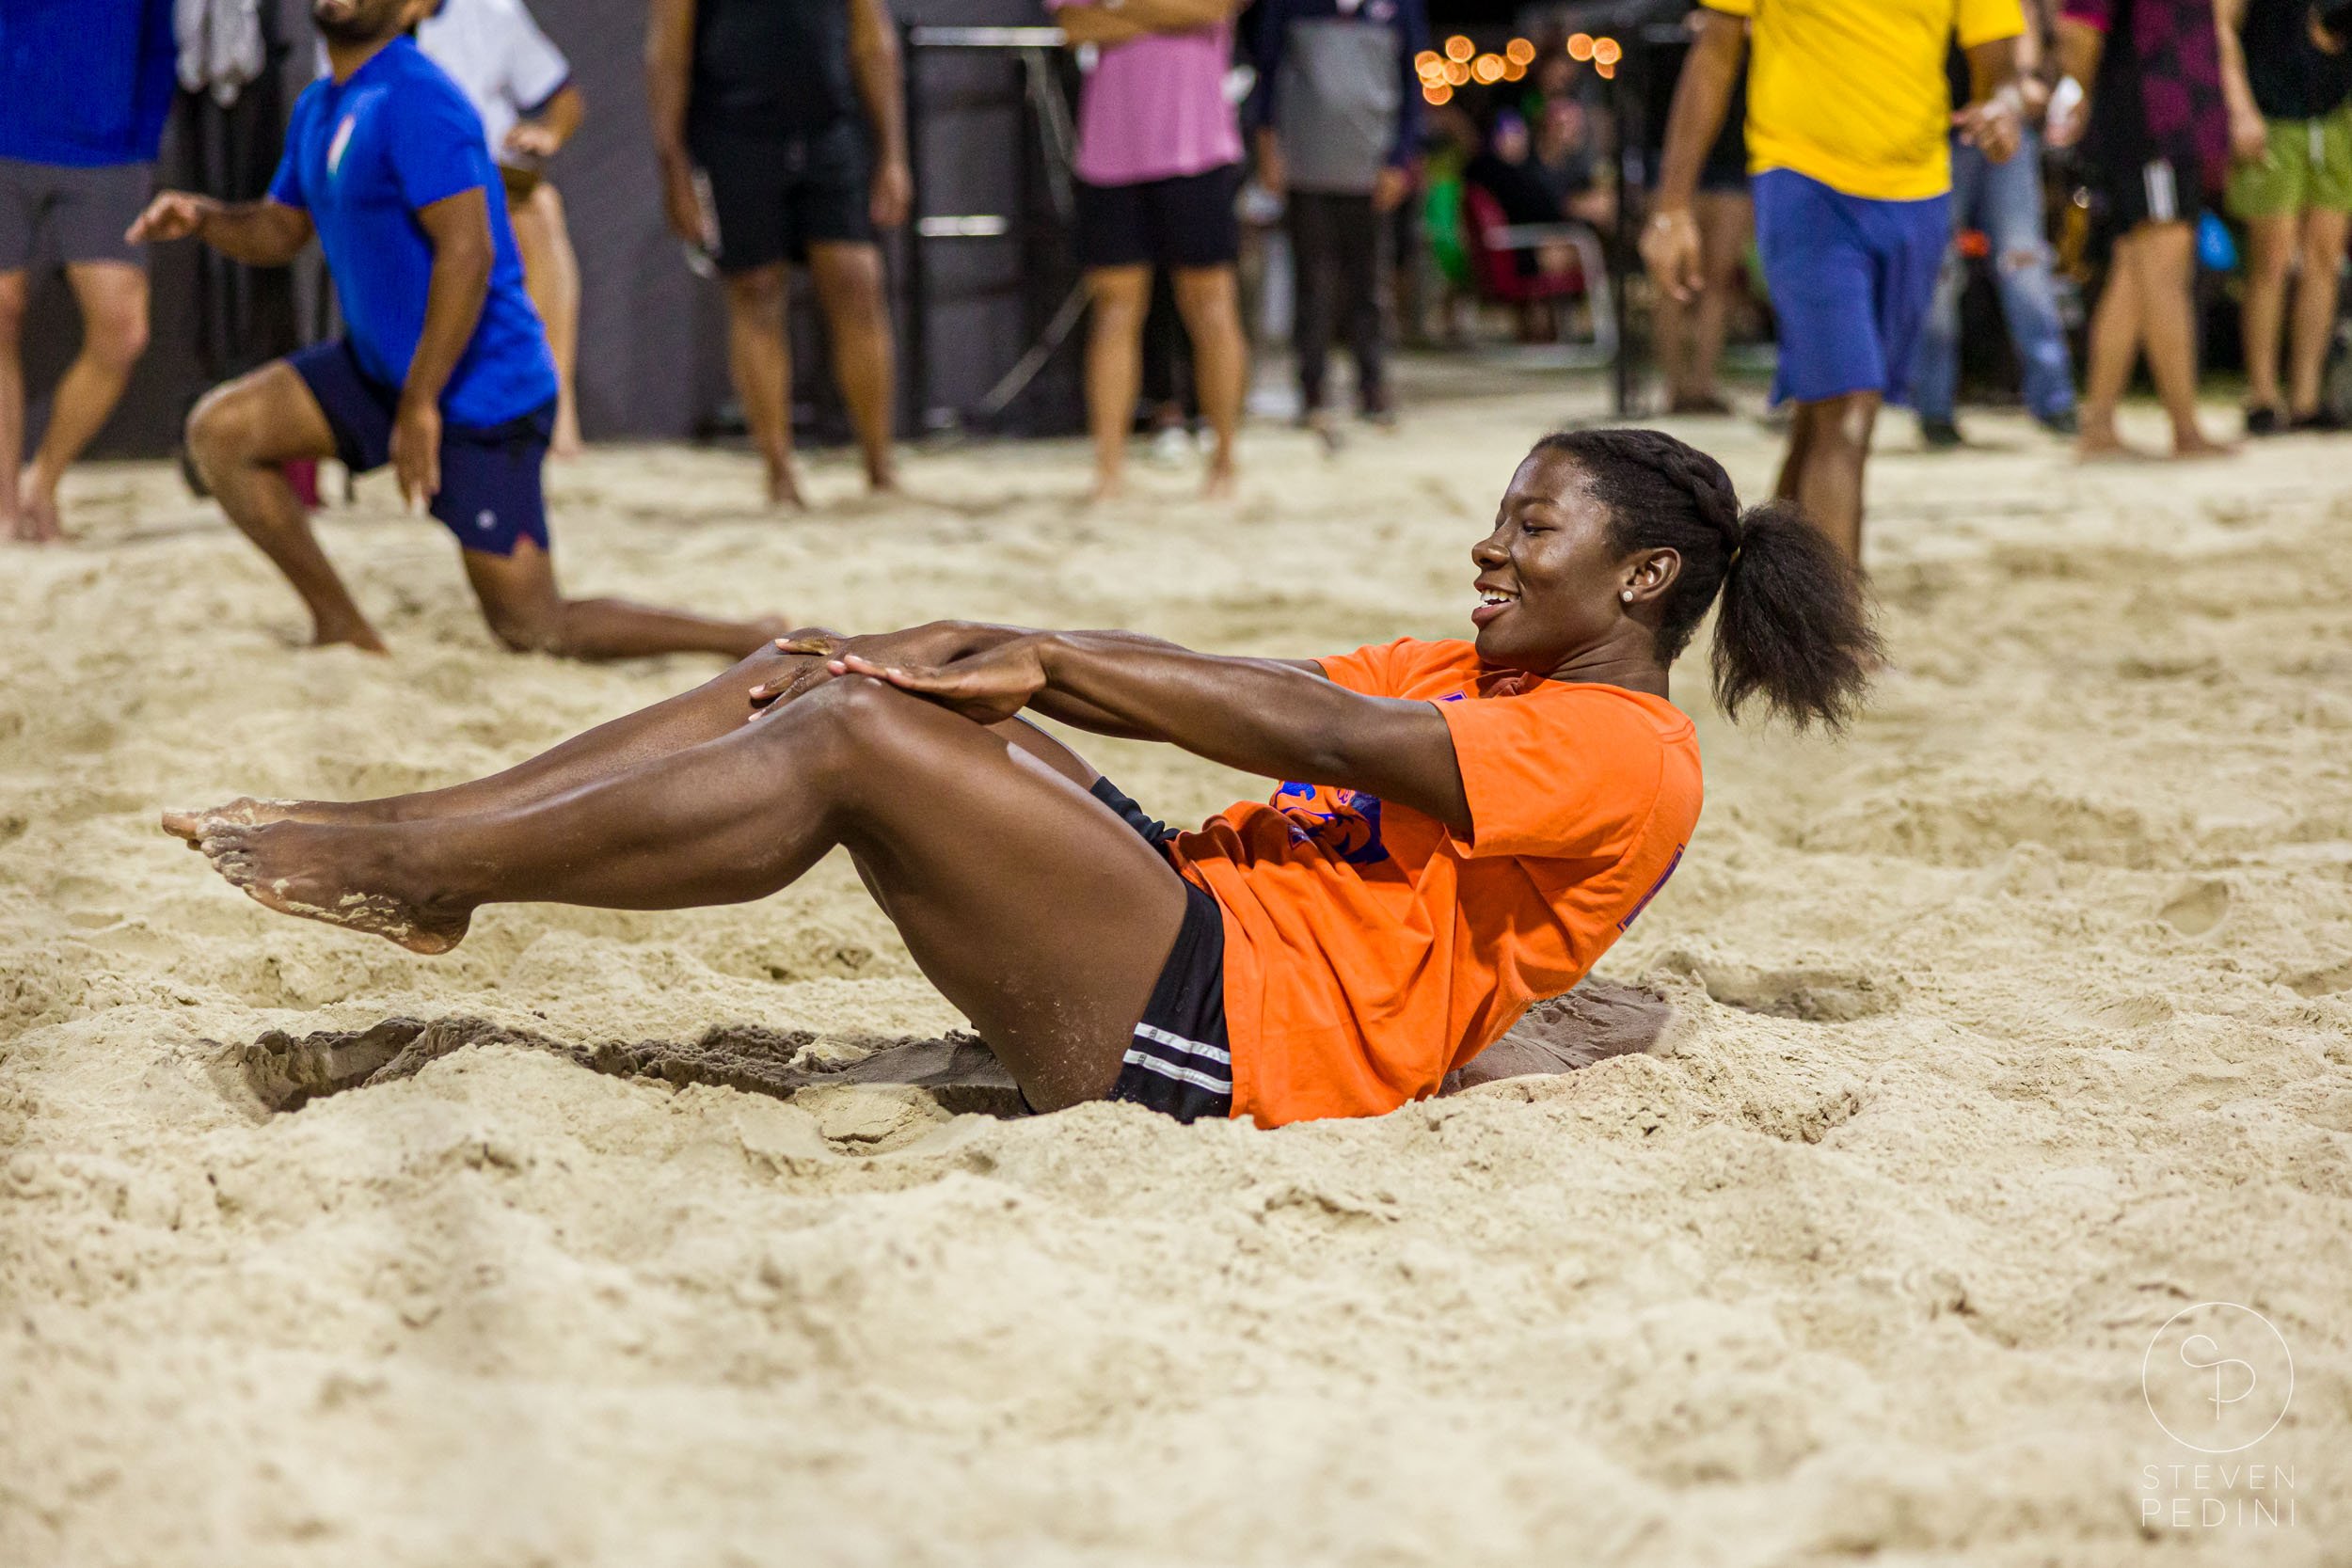 Steven Pedini Photography - Bumpy Pickle - Sand Volleyball - Houston TX - World Cup of Volleyball - 00341.jpg